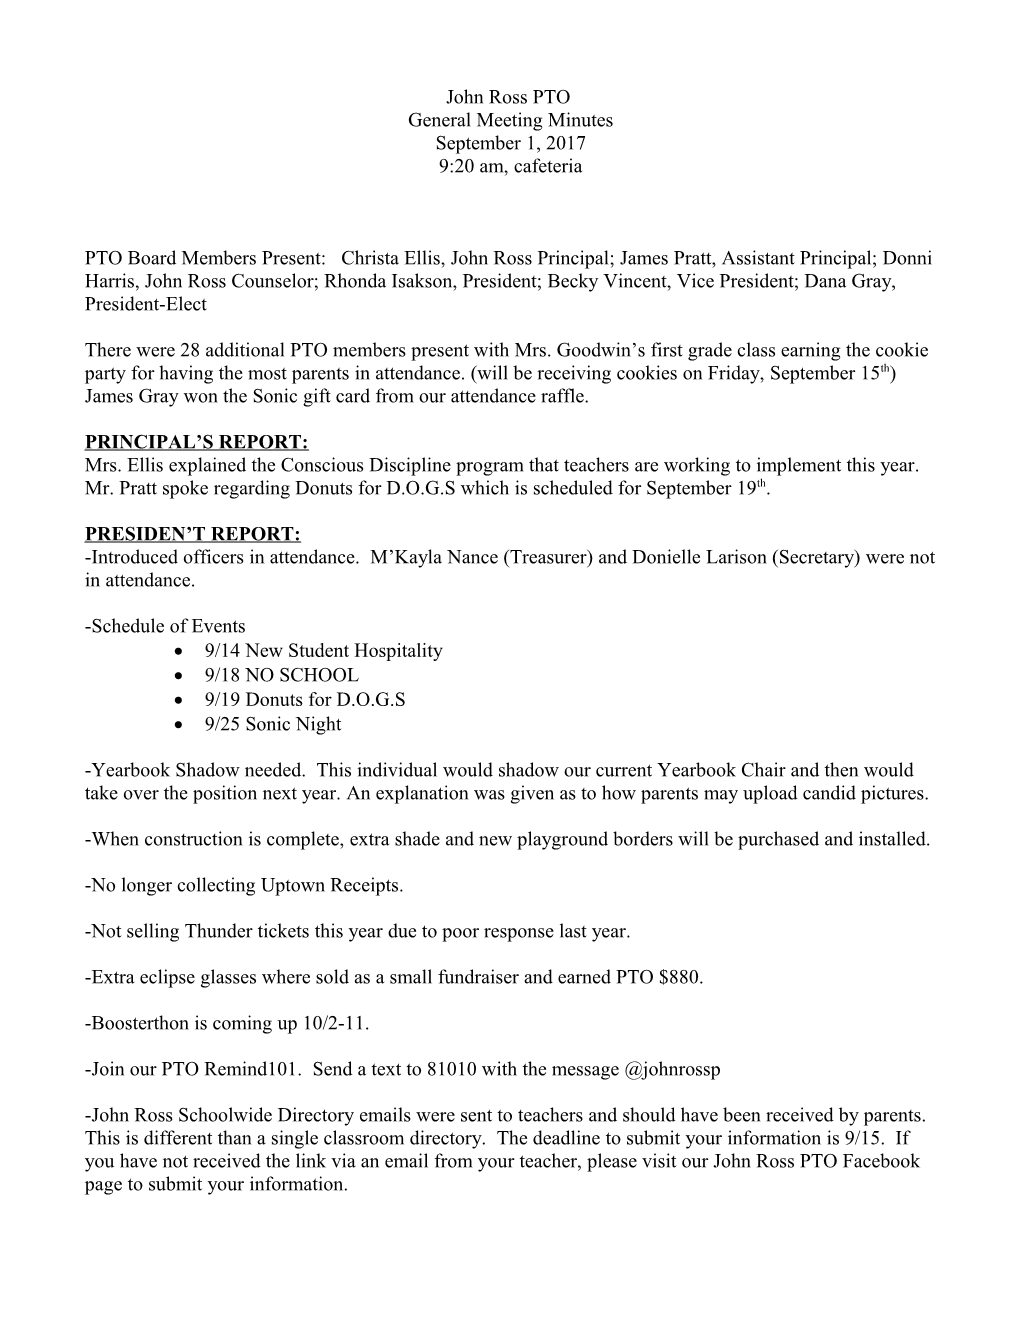 Minutes for PTO Meeting on March 6, 2015